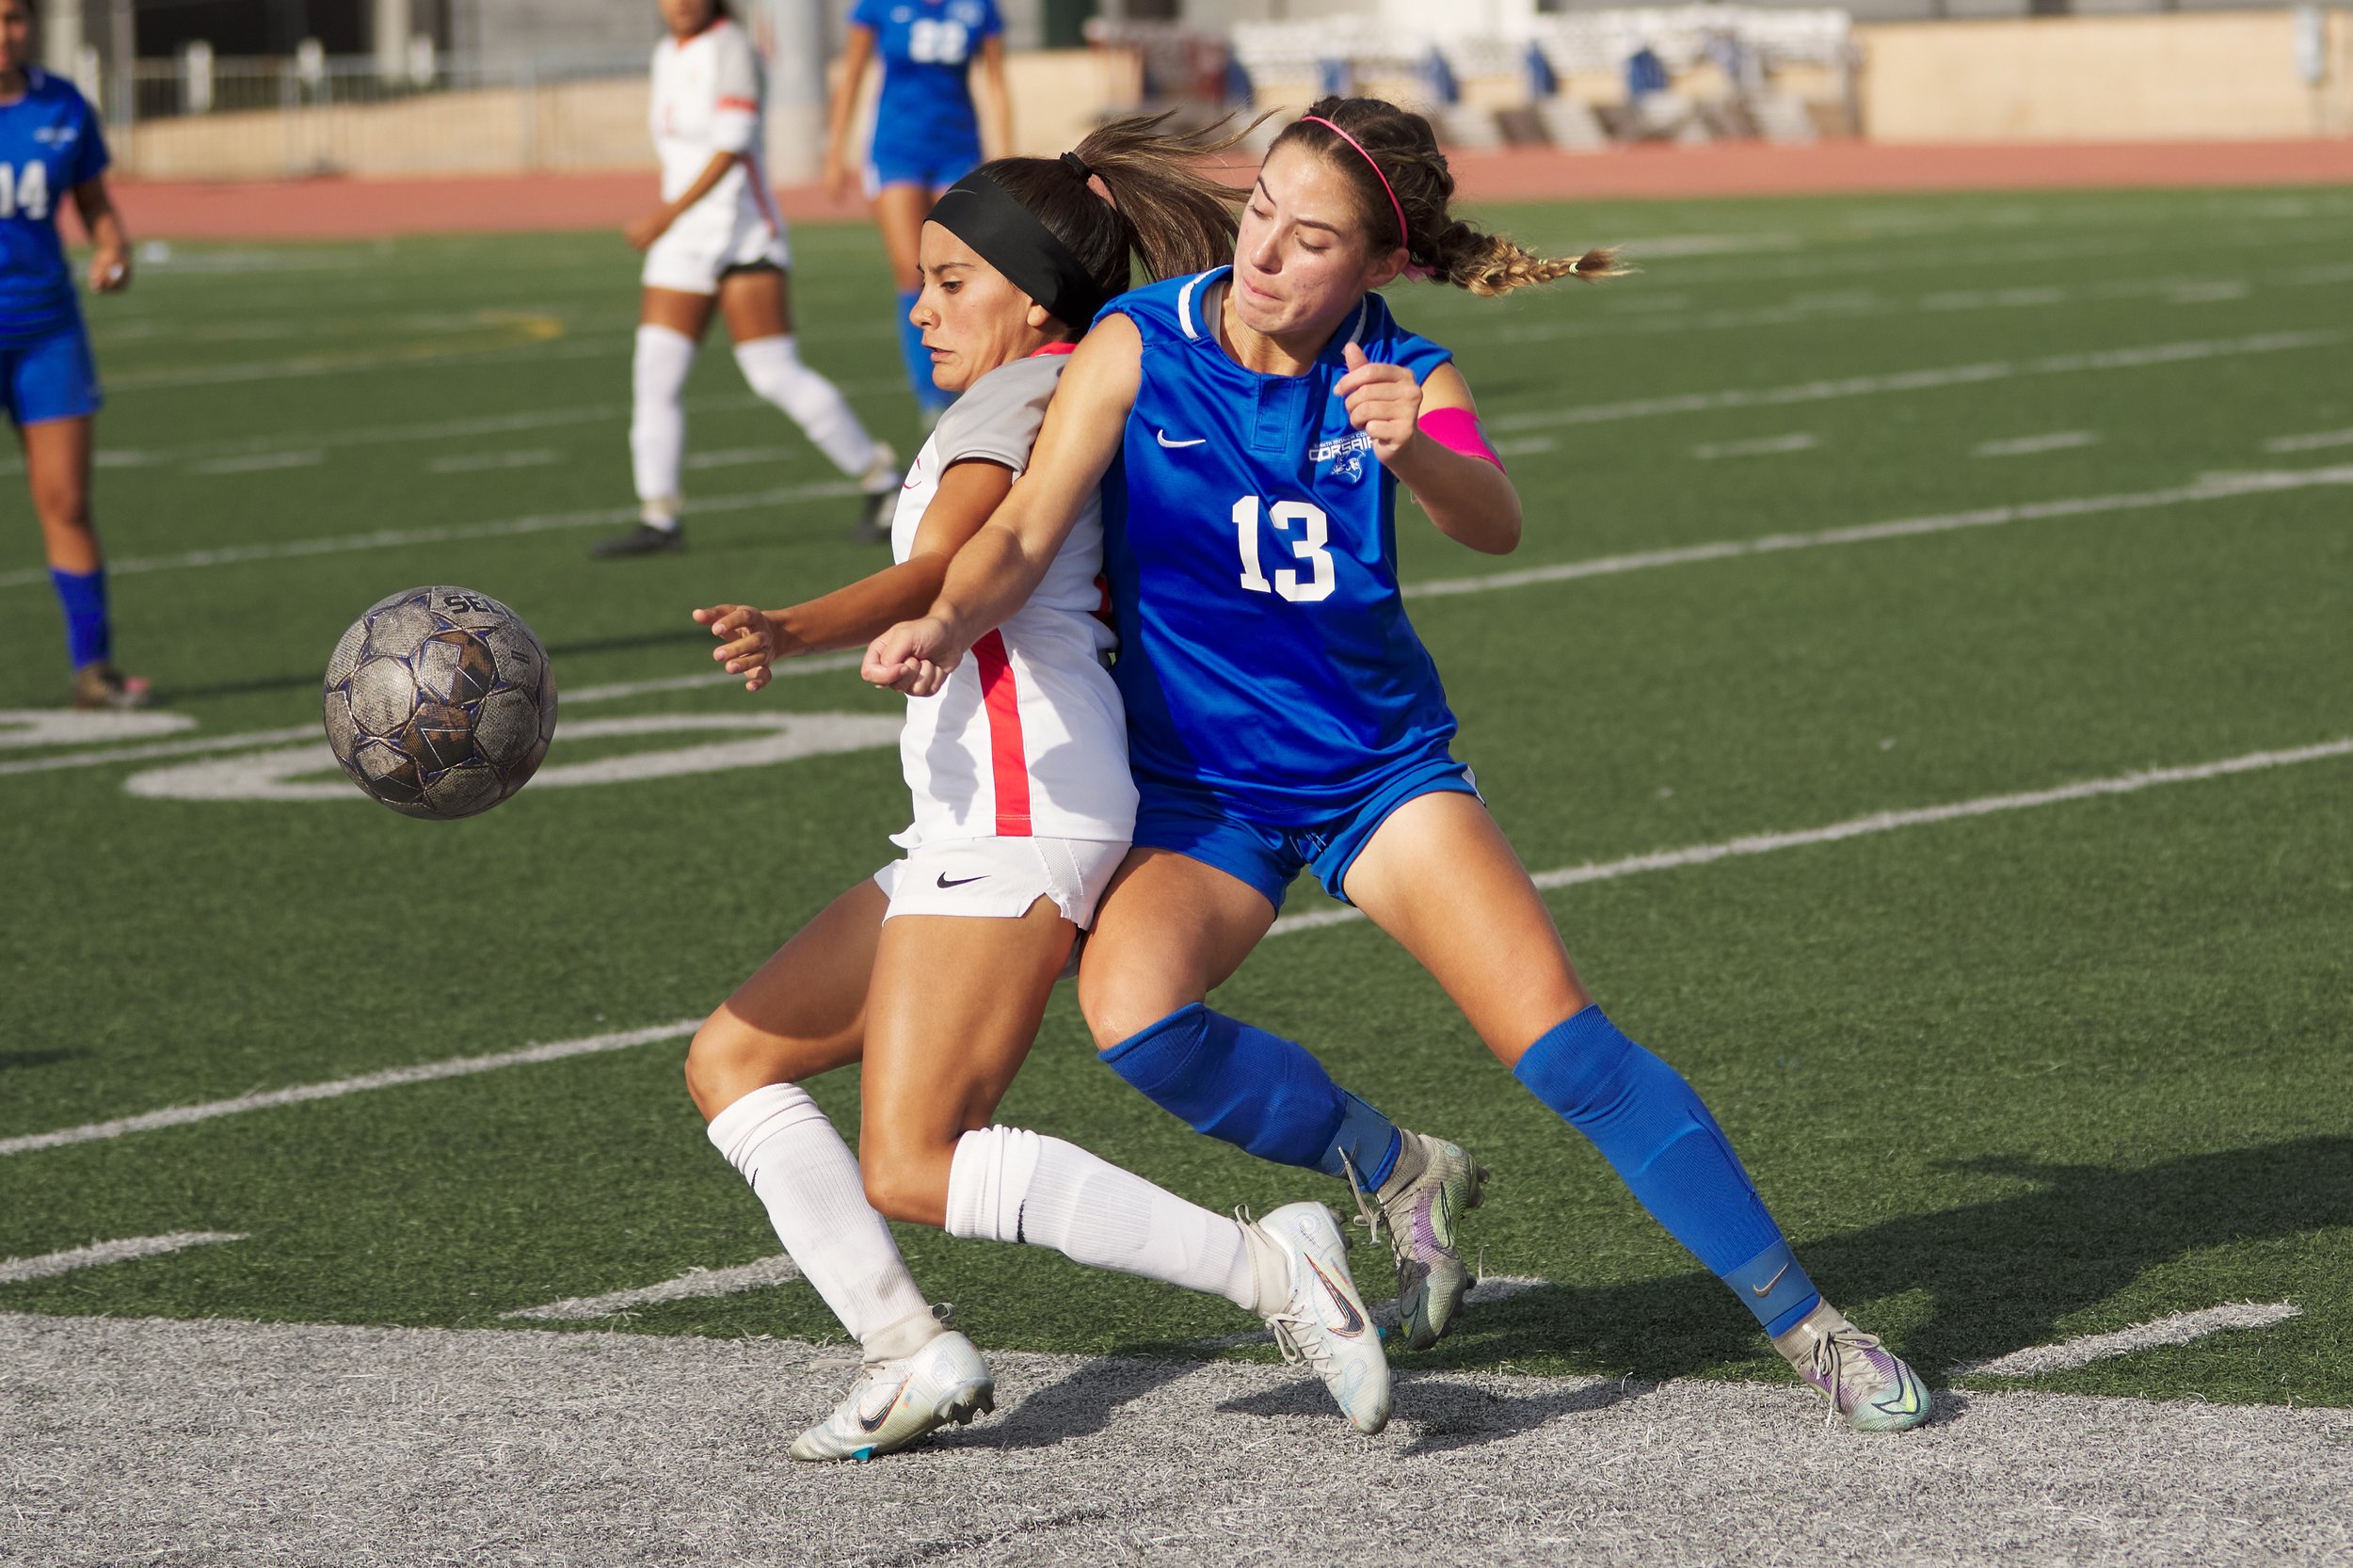  Bakersfield College Renegades' Jasmine Hinojosa and Santa Monica College Corsairs' Sophie Doumitt during the women's soccer match on Friday, Oct. 20, 2022, at Corsair Field in Santa Monica, Calif. The Corsairs tied 1-1. (Nicholas McCall | The Corsai